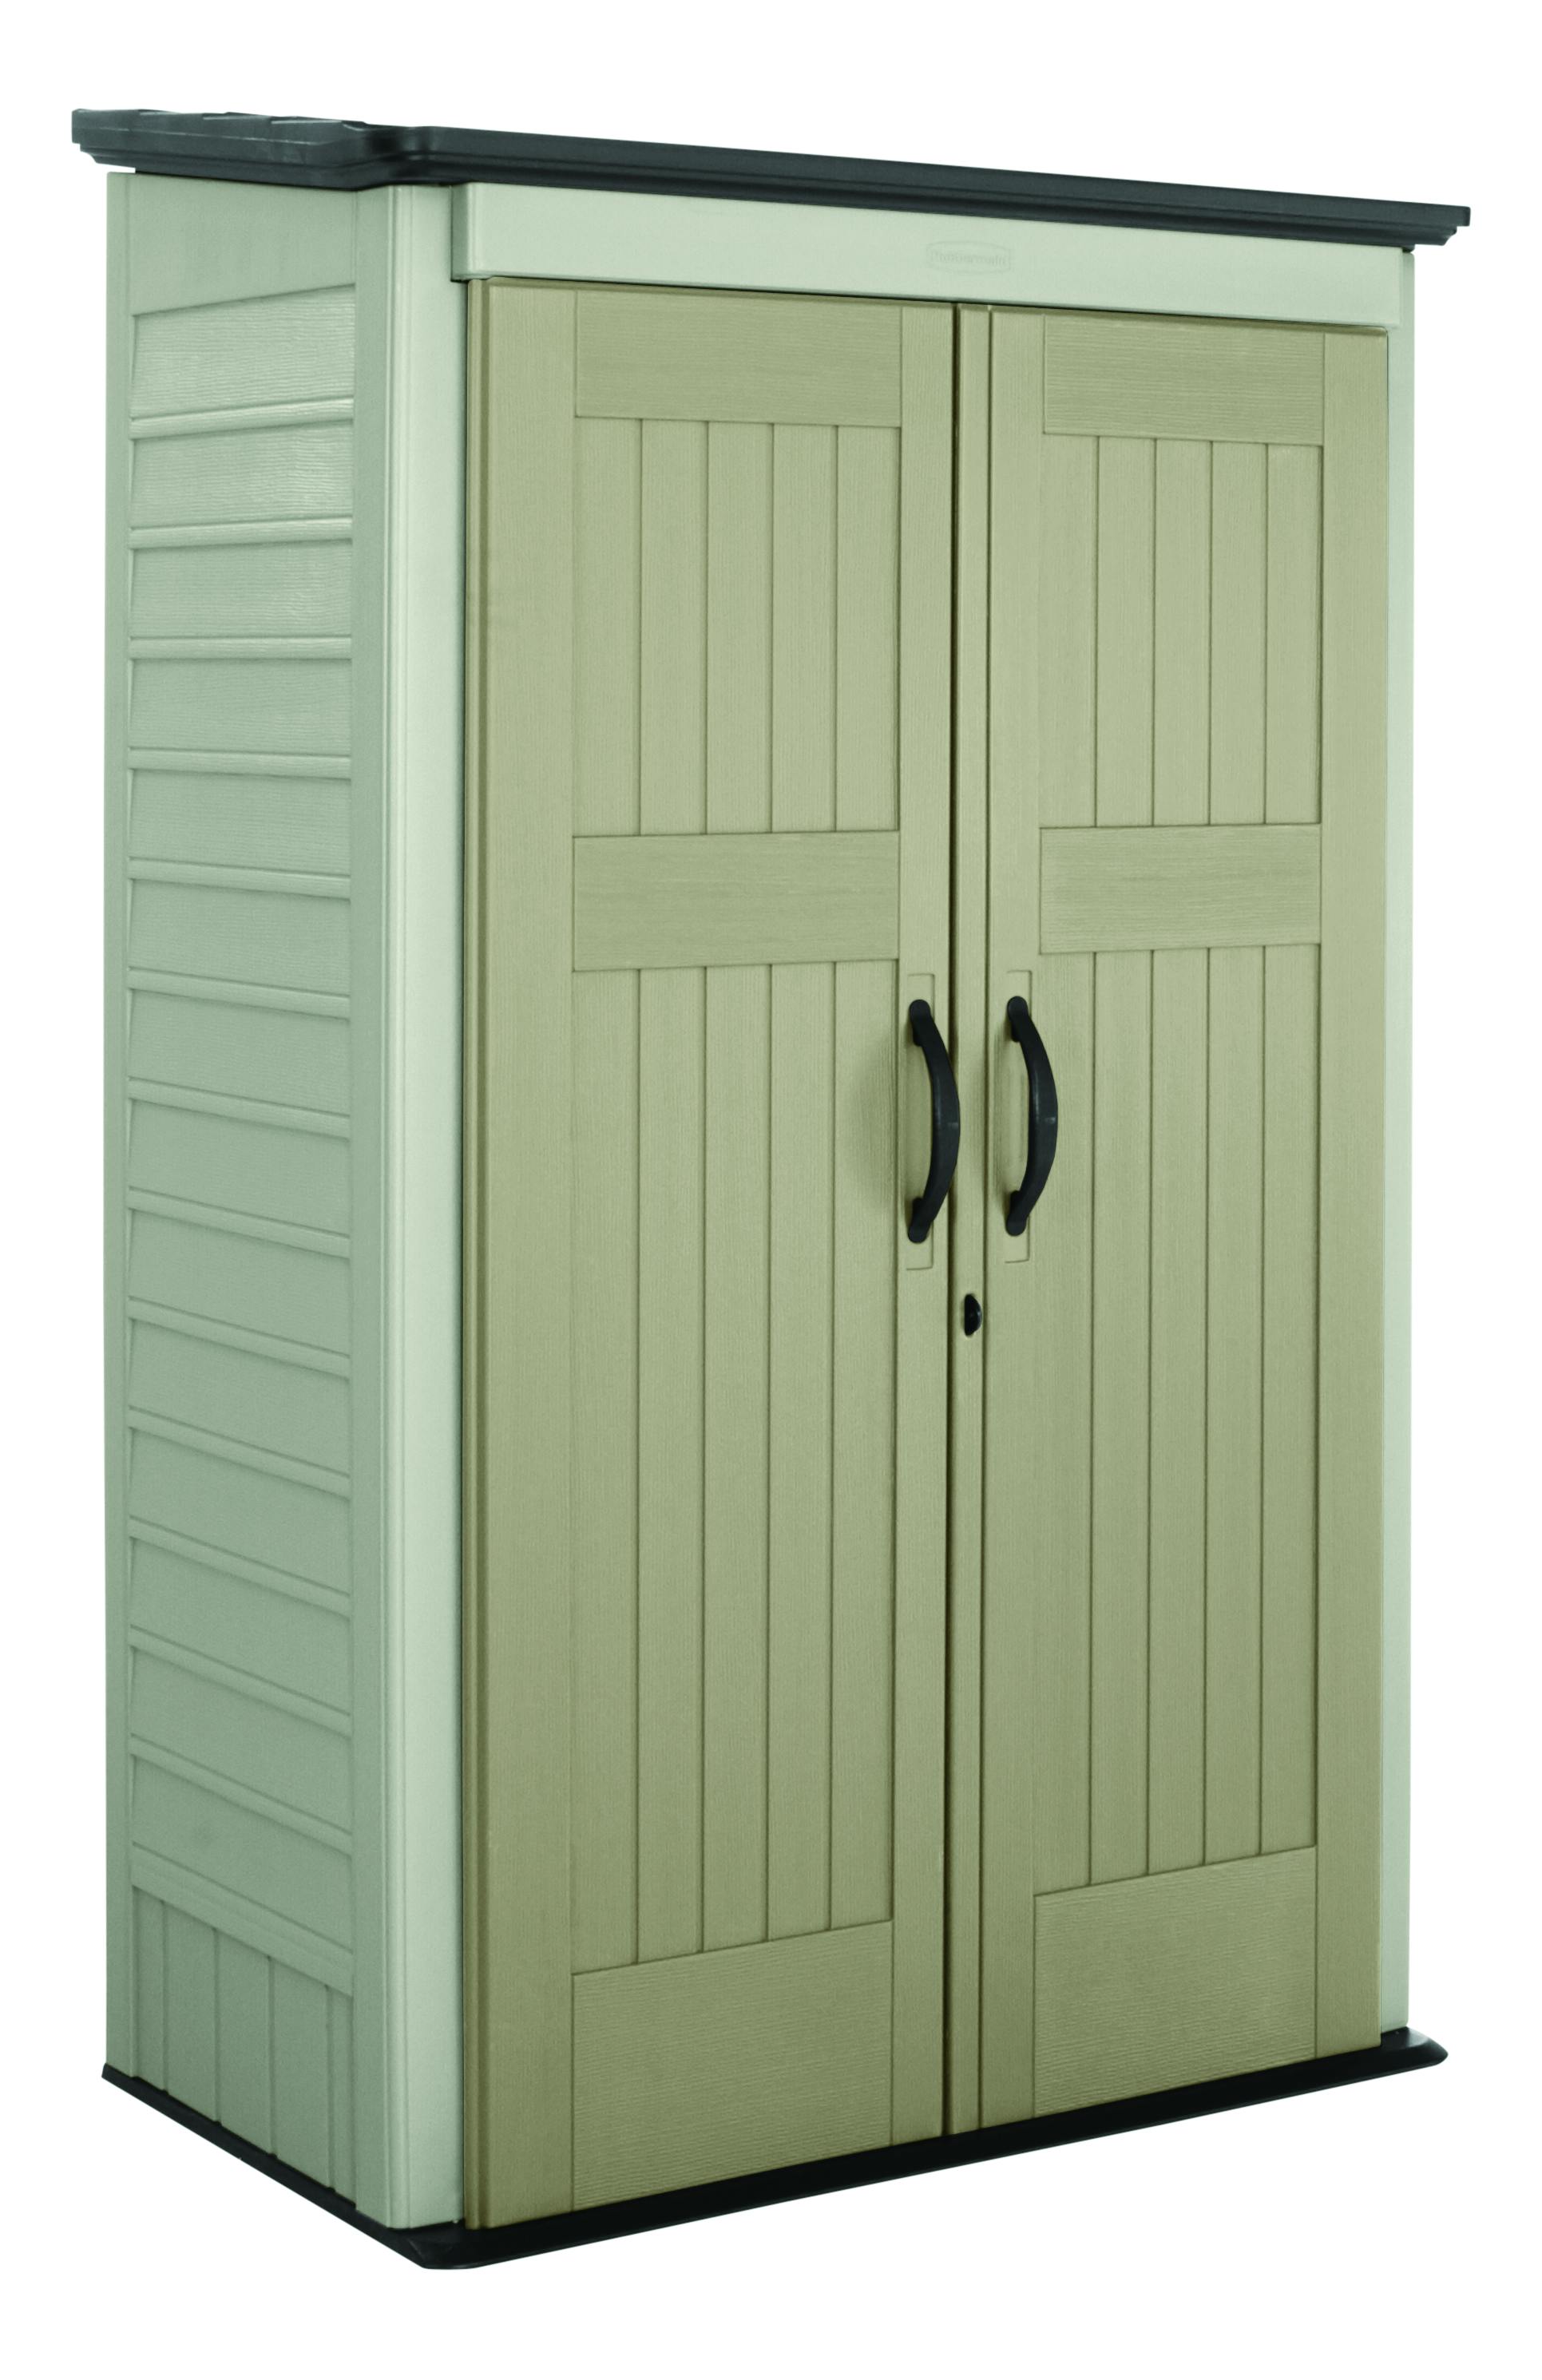 Vertical Storage Shed | Rubbermaid